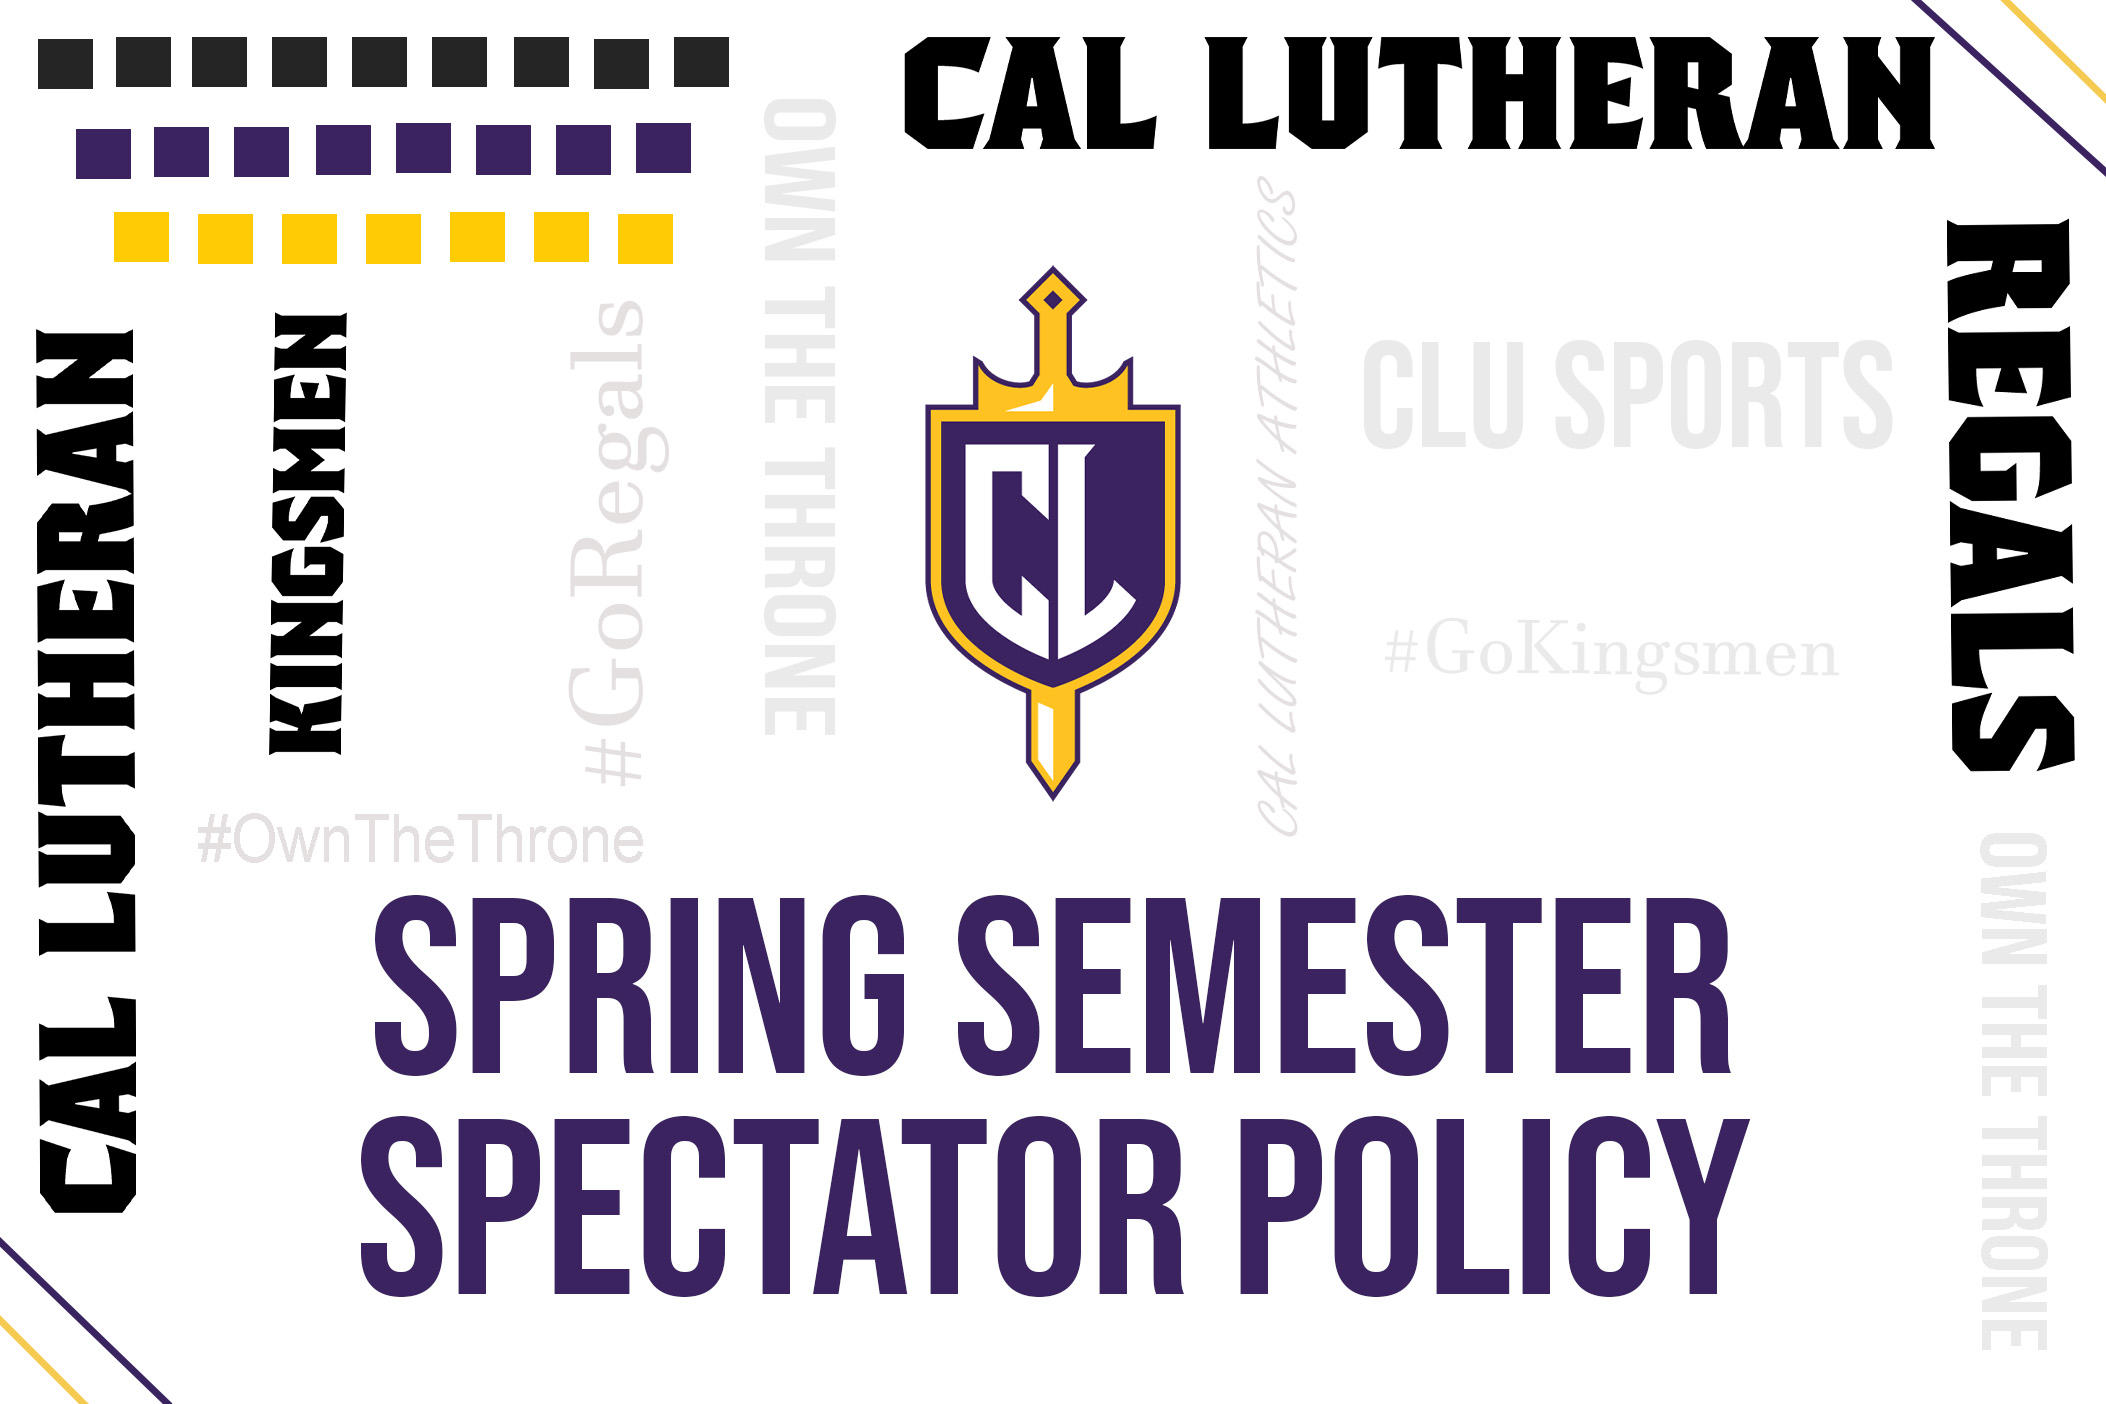 SCIAC, Cal Lutheran Starting Spring With No Spectator Policy